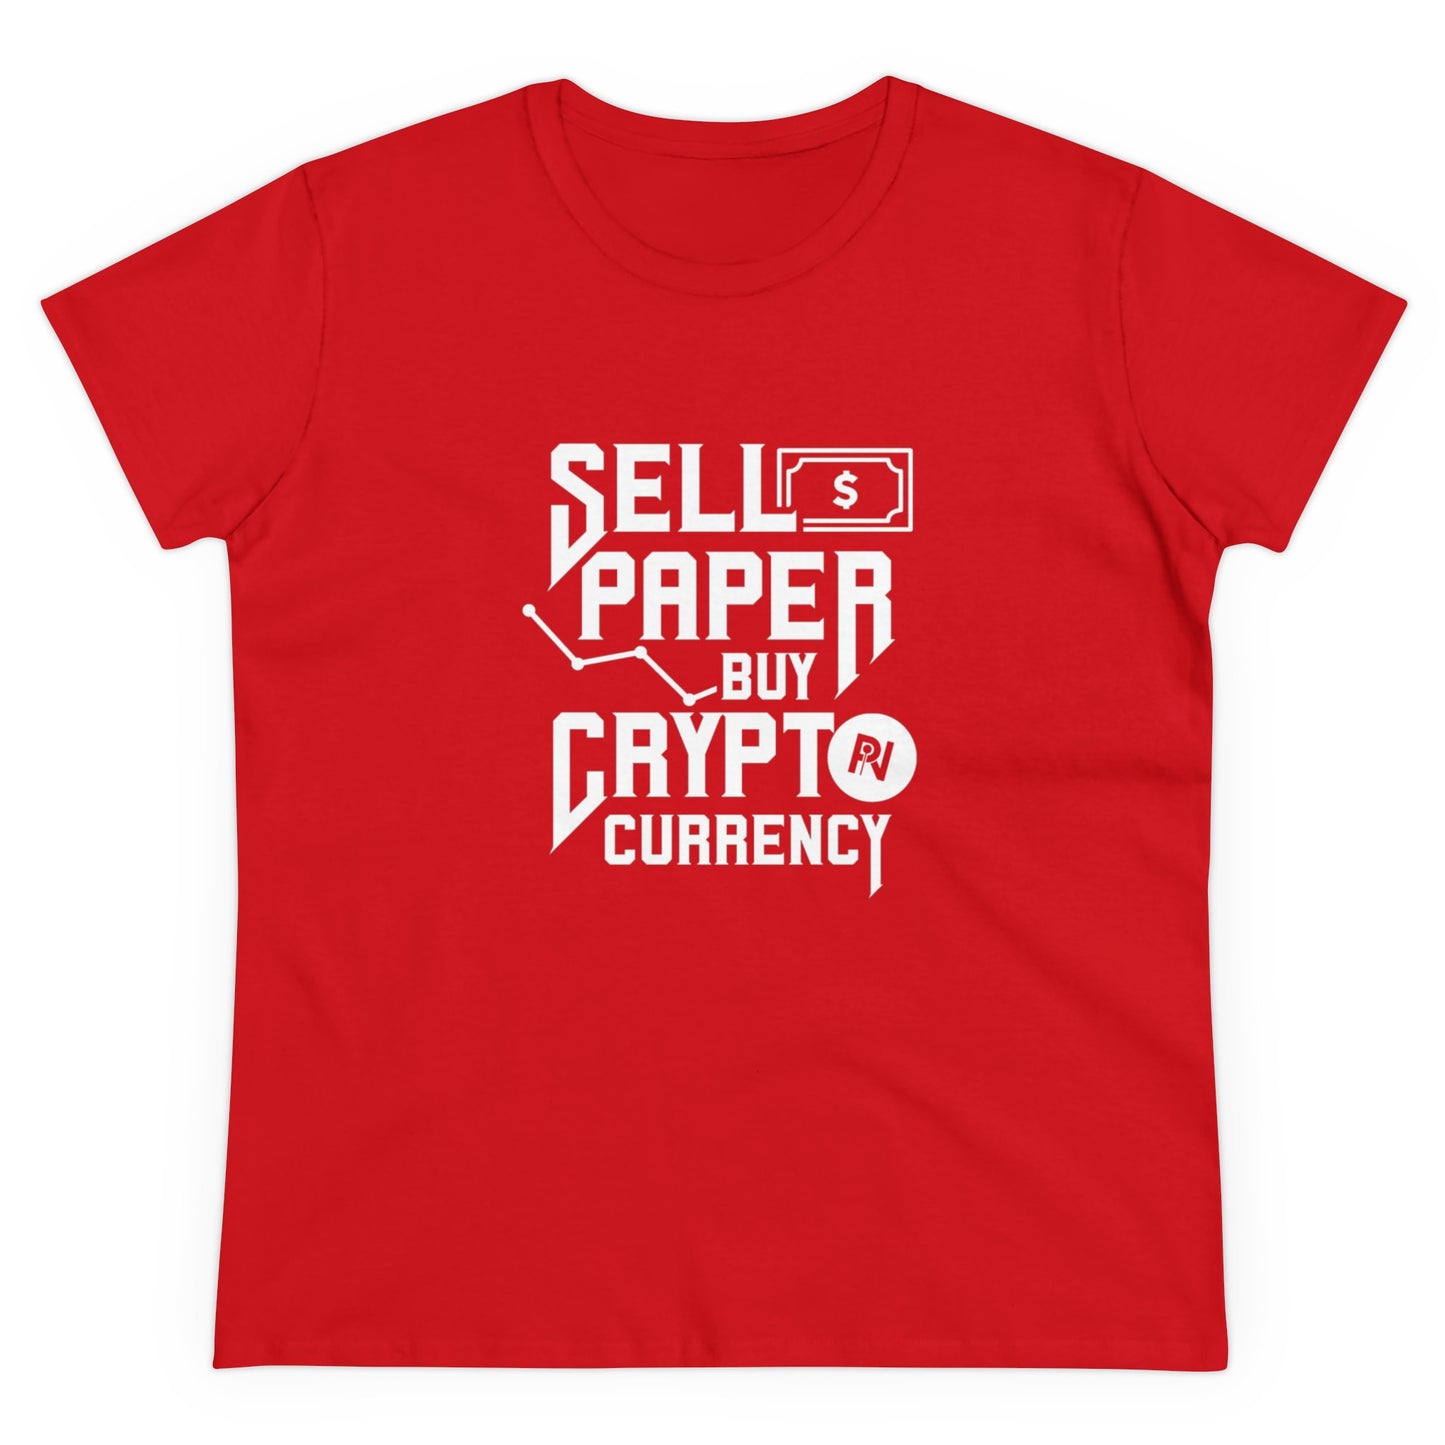 Women's Cotton Tee (Sell crypto, Buy Paper)